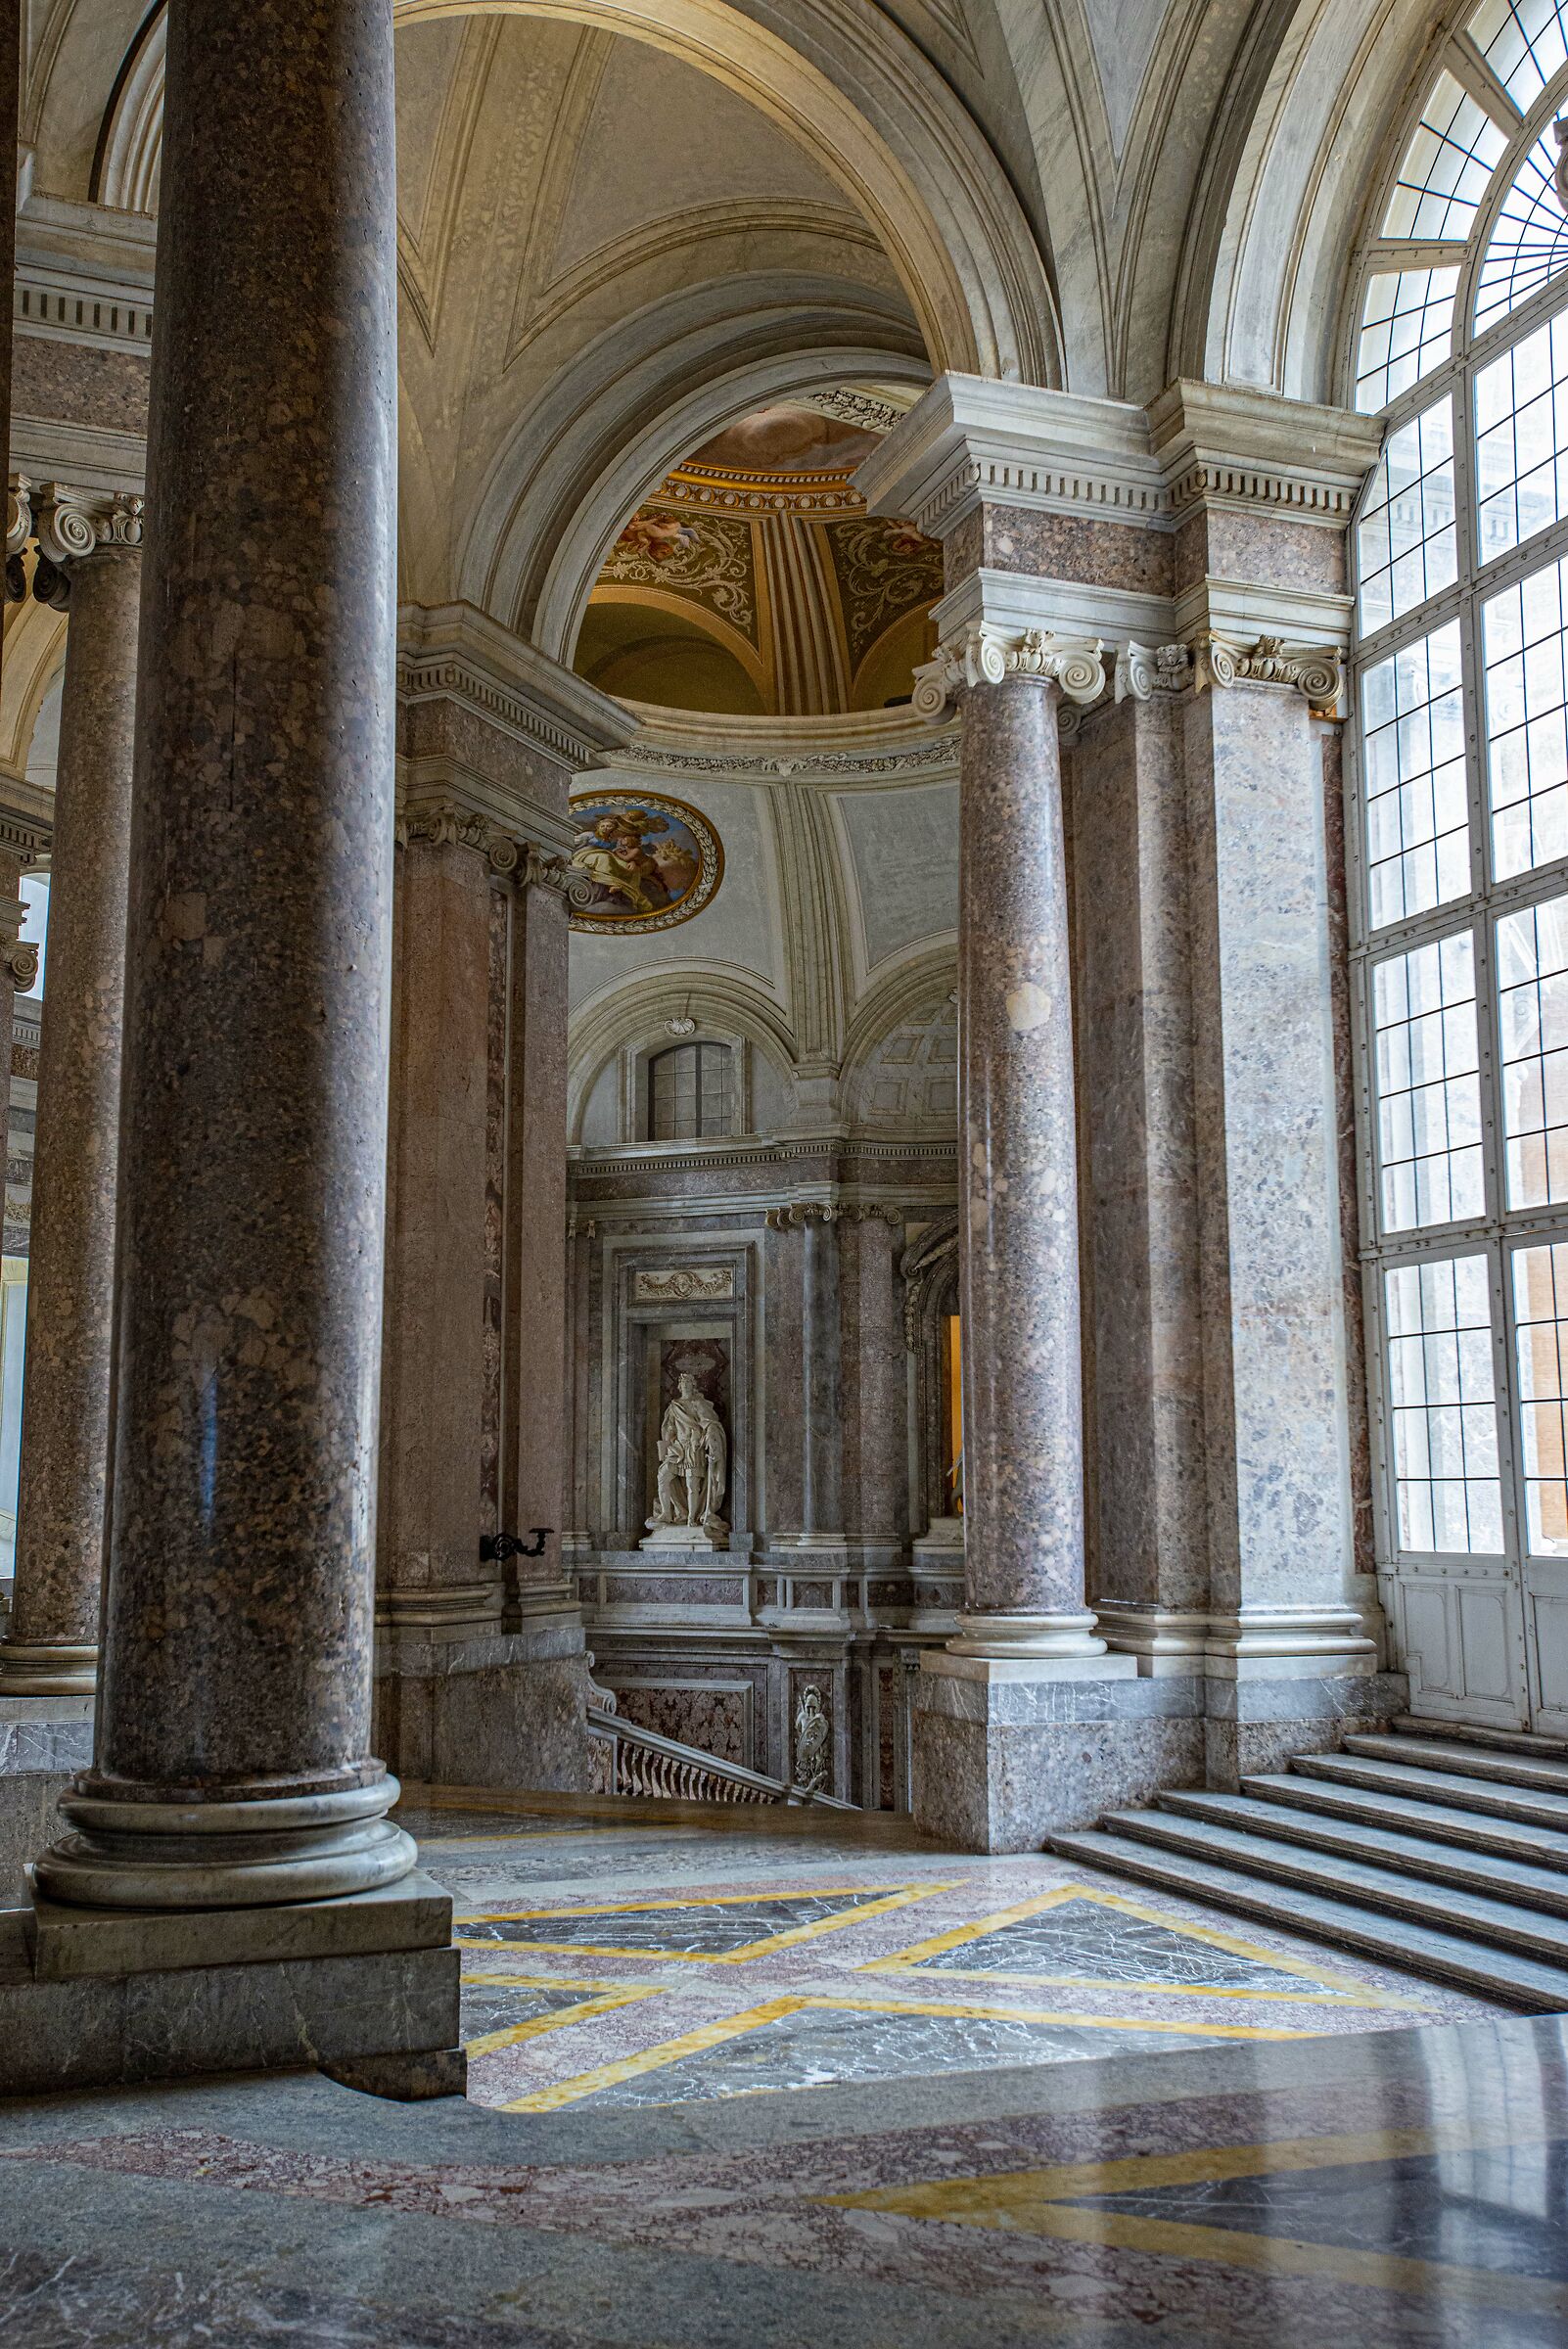 Interior of the Royal Palace of Caserta...